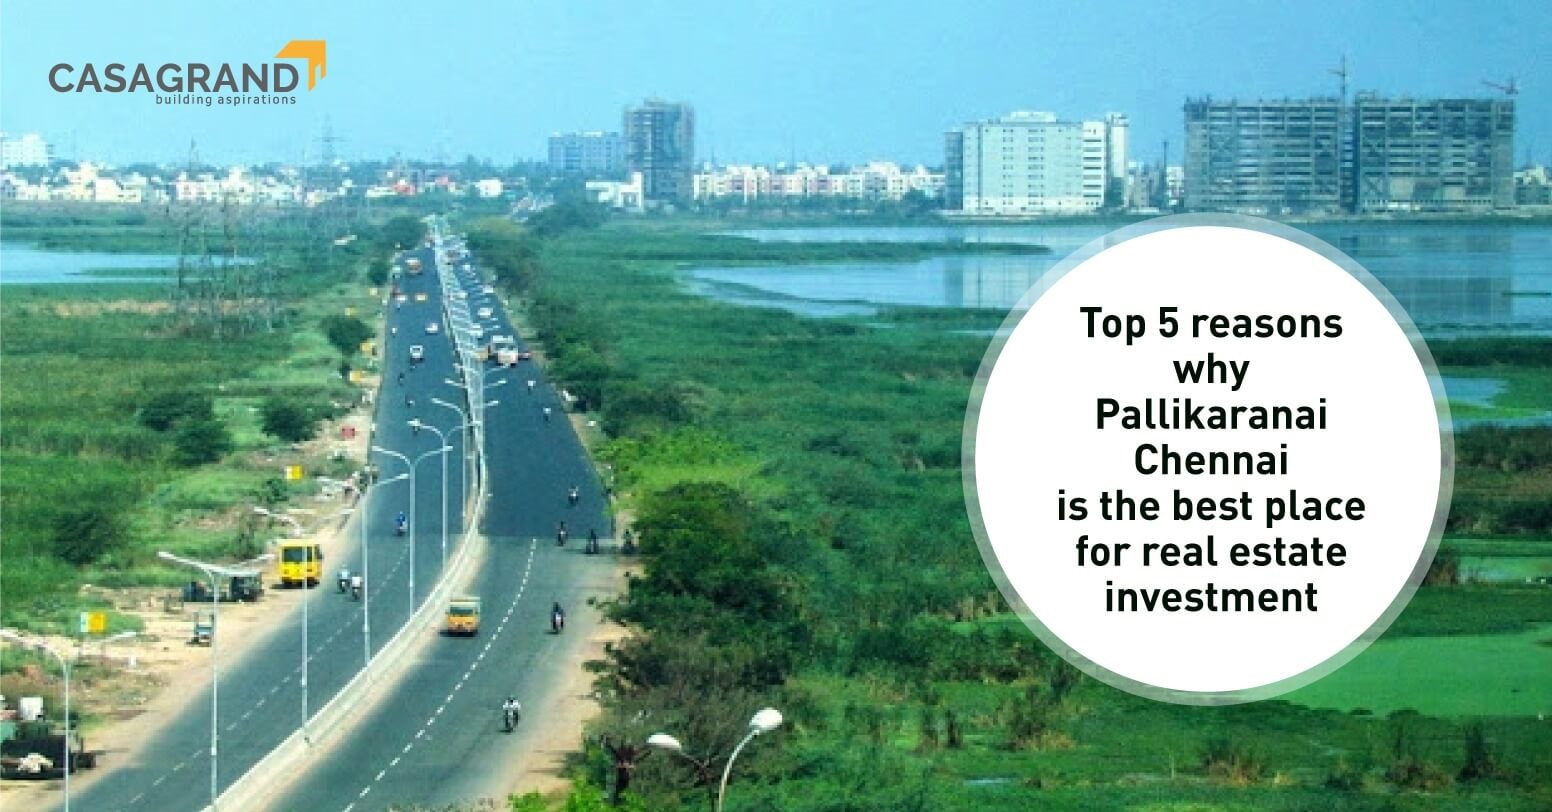 Top 5 Reasons Why Pallikaranai, Chennai is the Best Place for Real Estate Investment